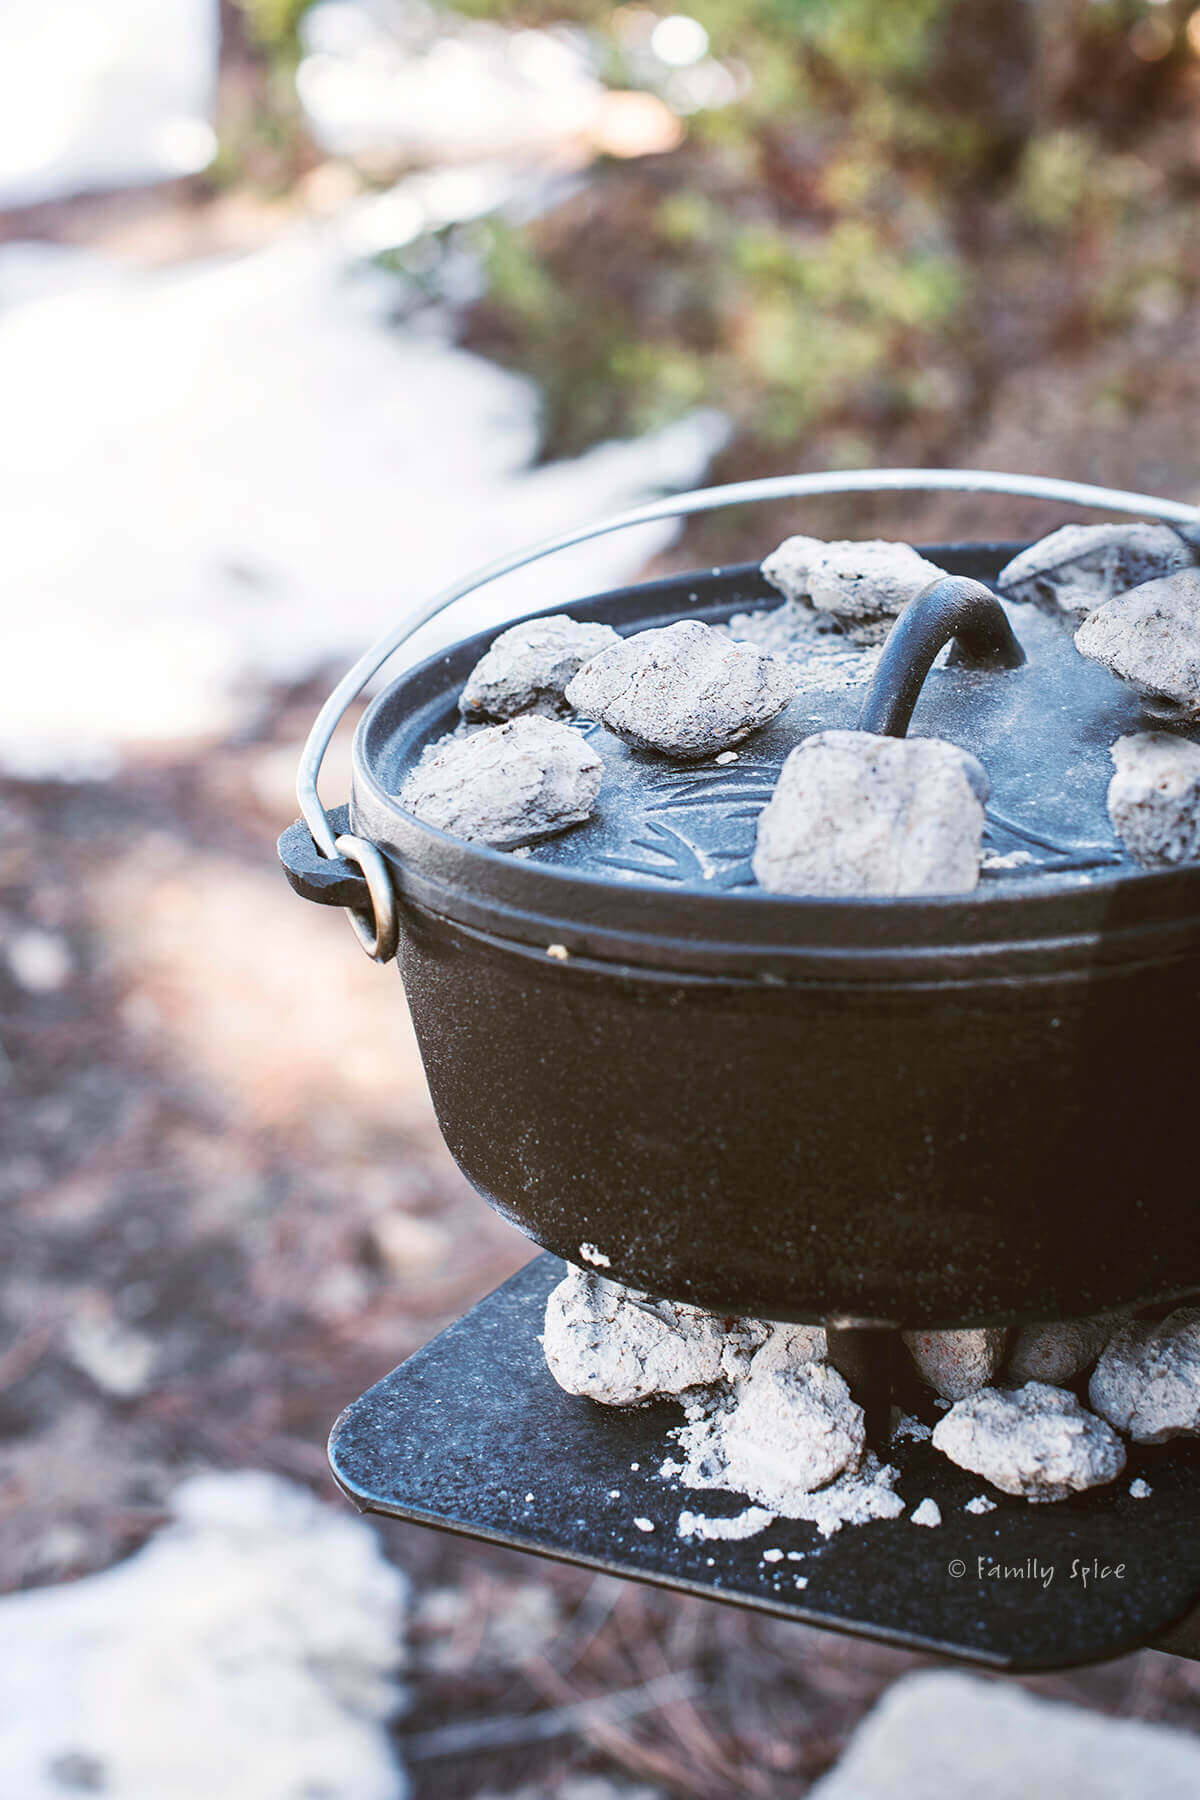 Dutch oven cooking with coals in forest with snow